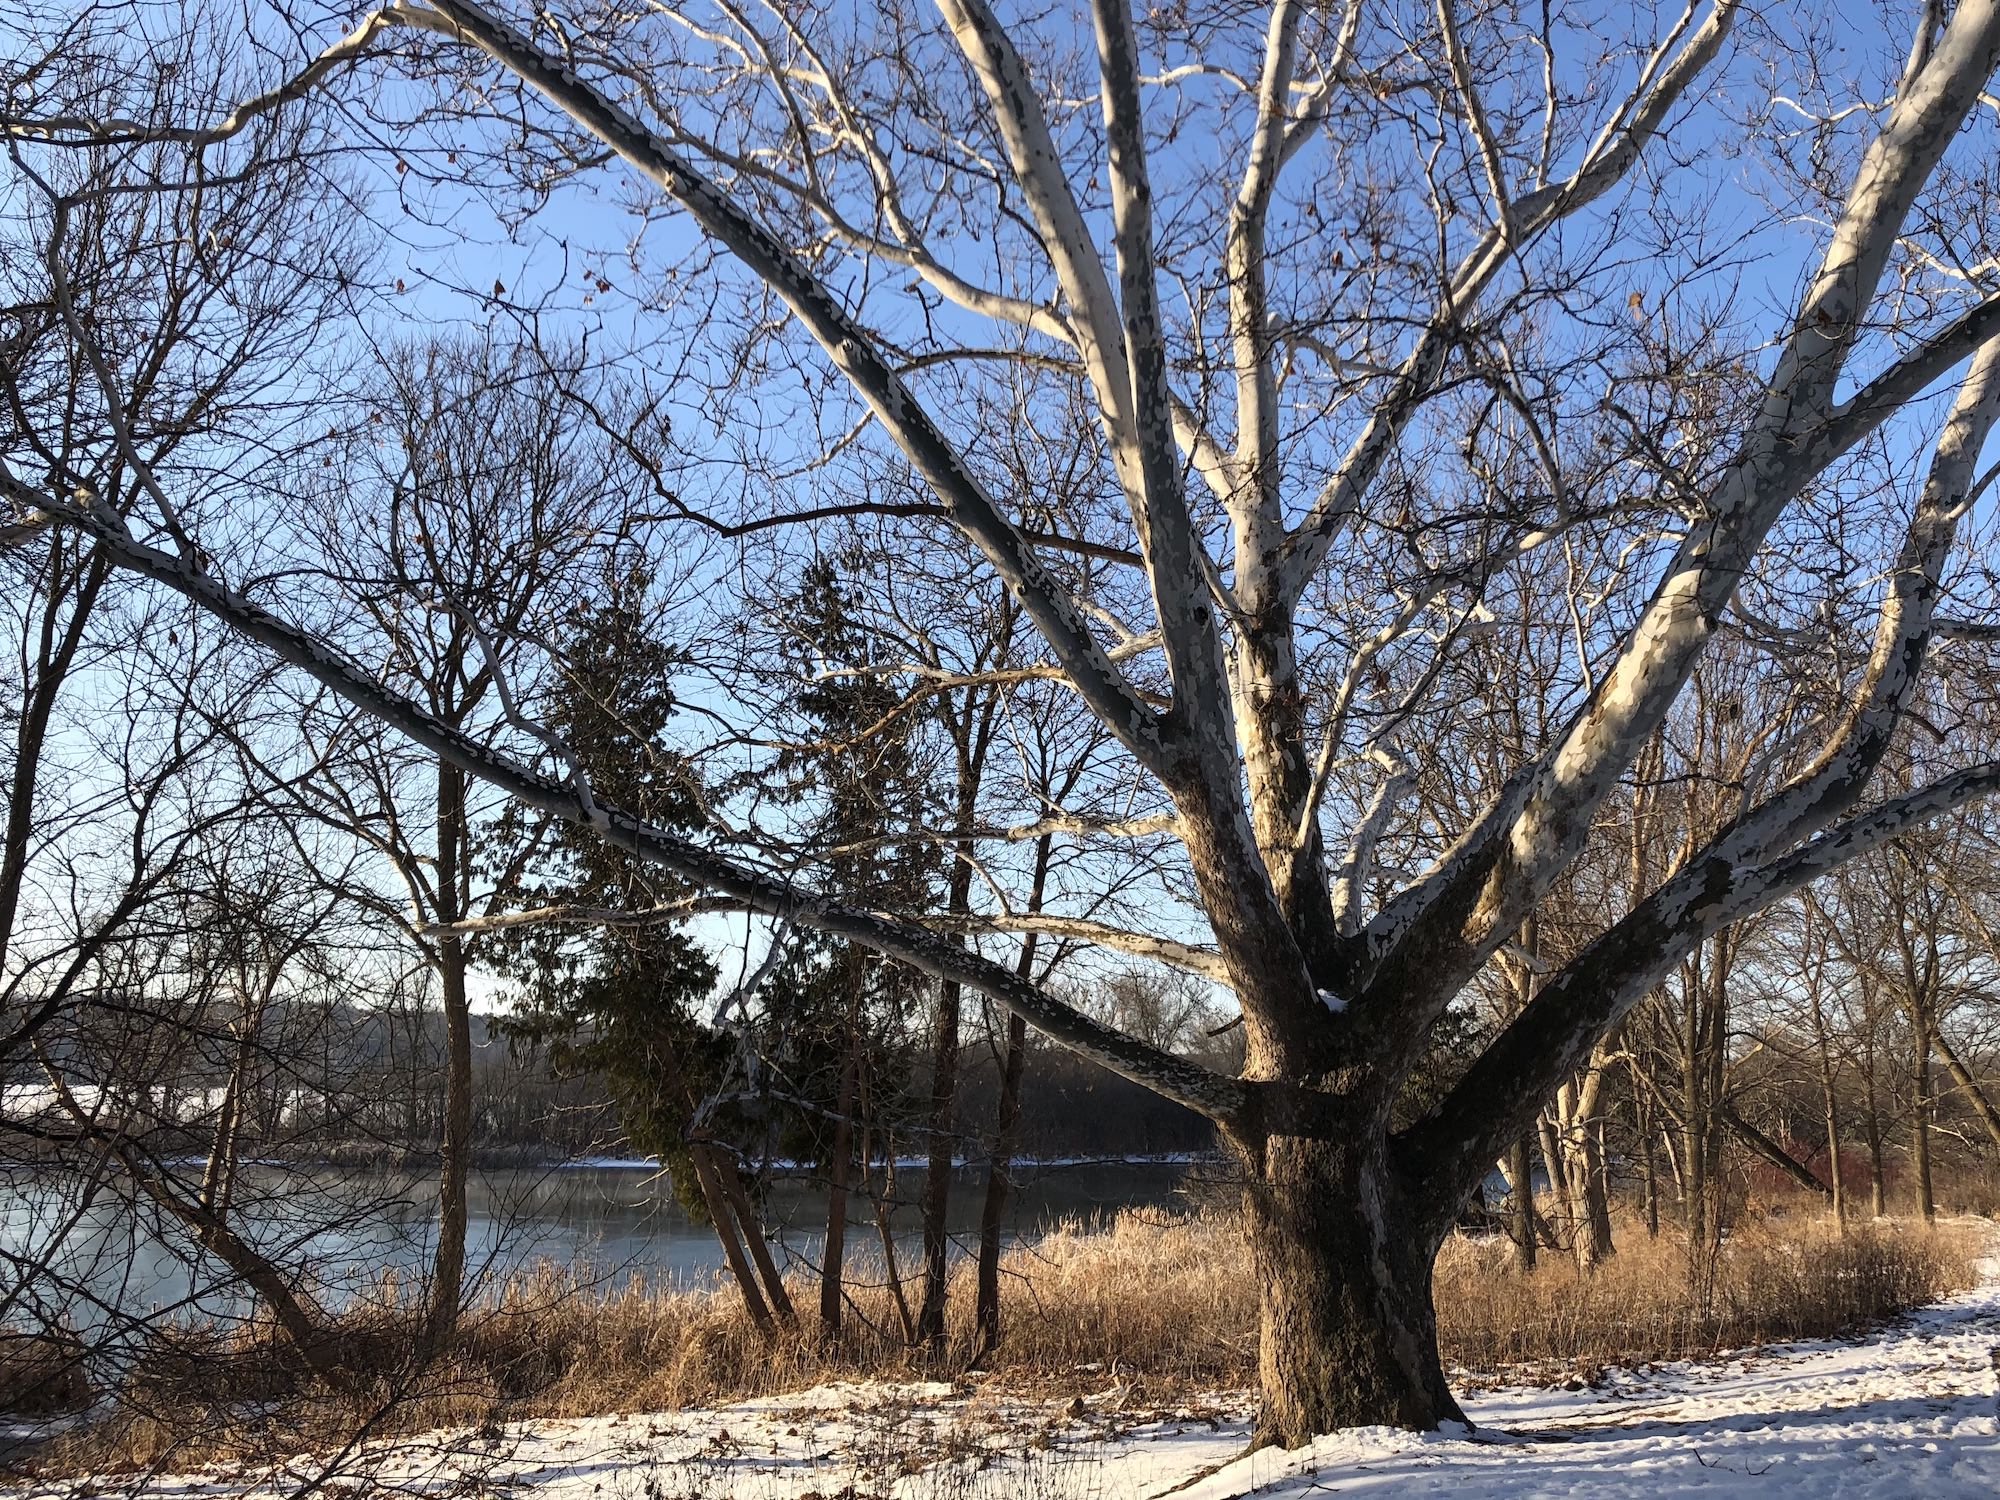 Sycamore tree between Ho-Nee-Um Pond and Arbor Drive on north shore of Lake Wingra on March 10, 2018.